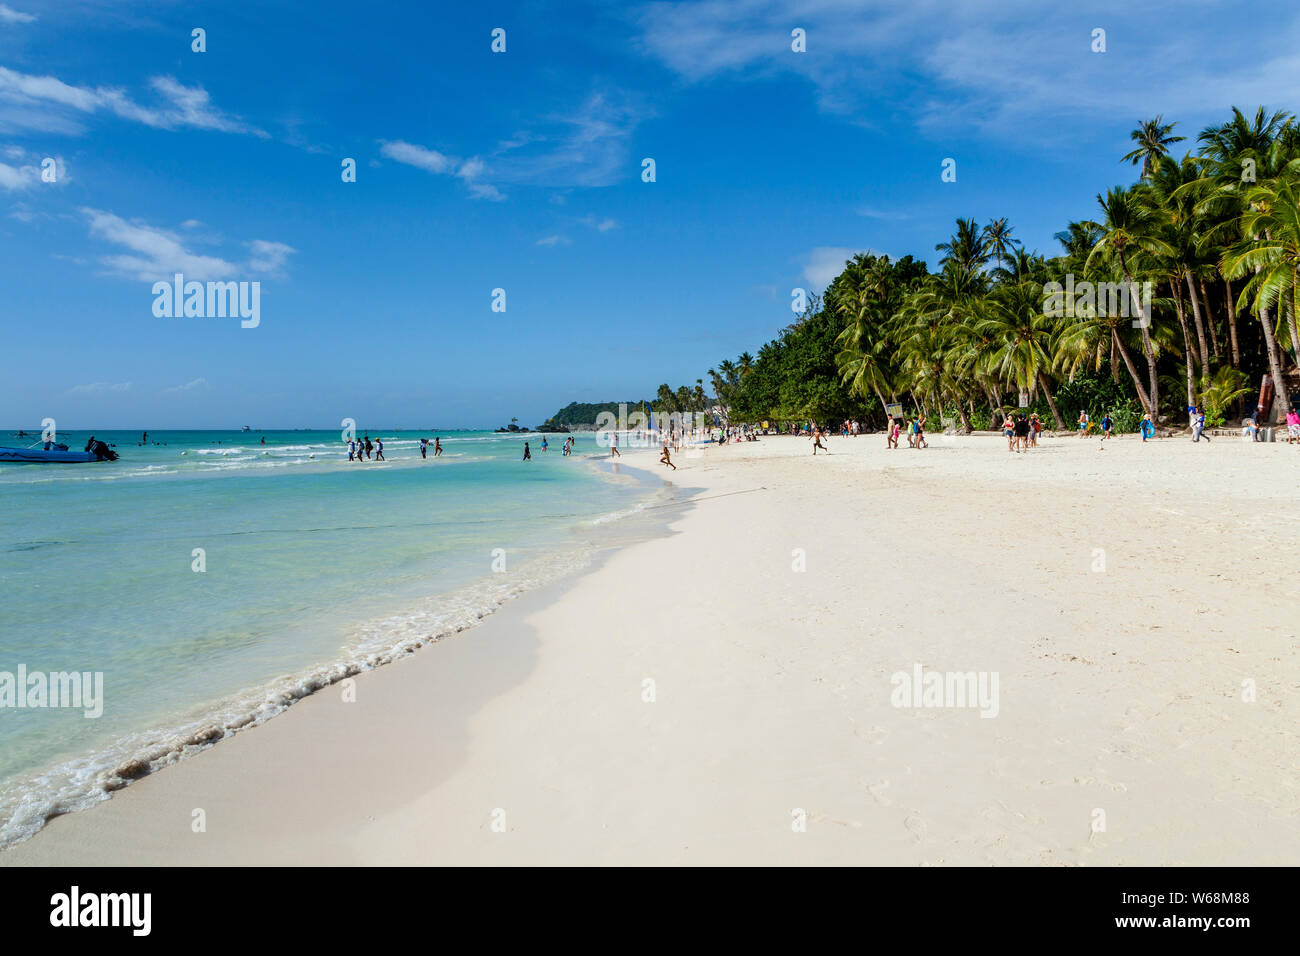 White Beach, Boracay, Aklan, Philippines Banque D'Images